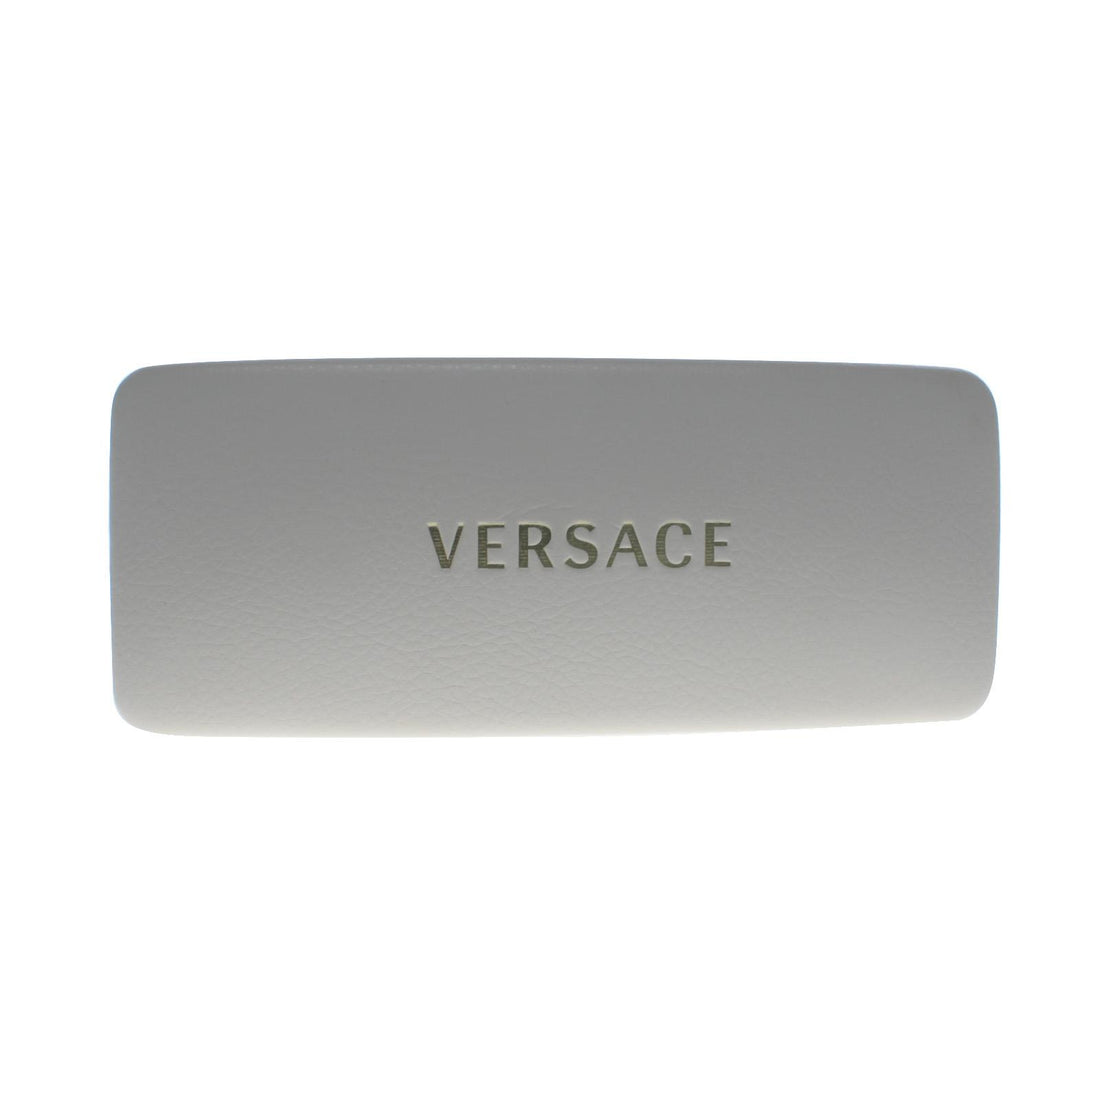 Versace medium white faux leather clamshell Sunglasses Case